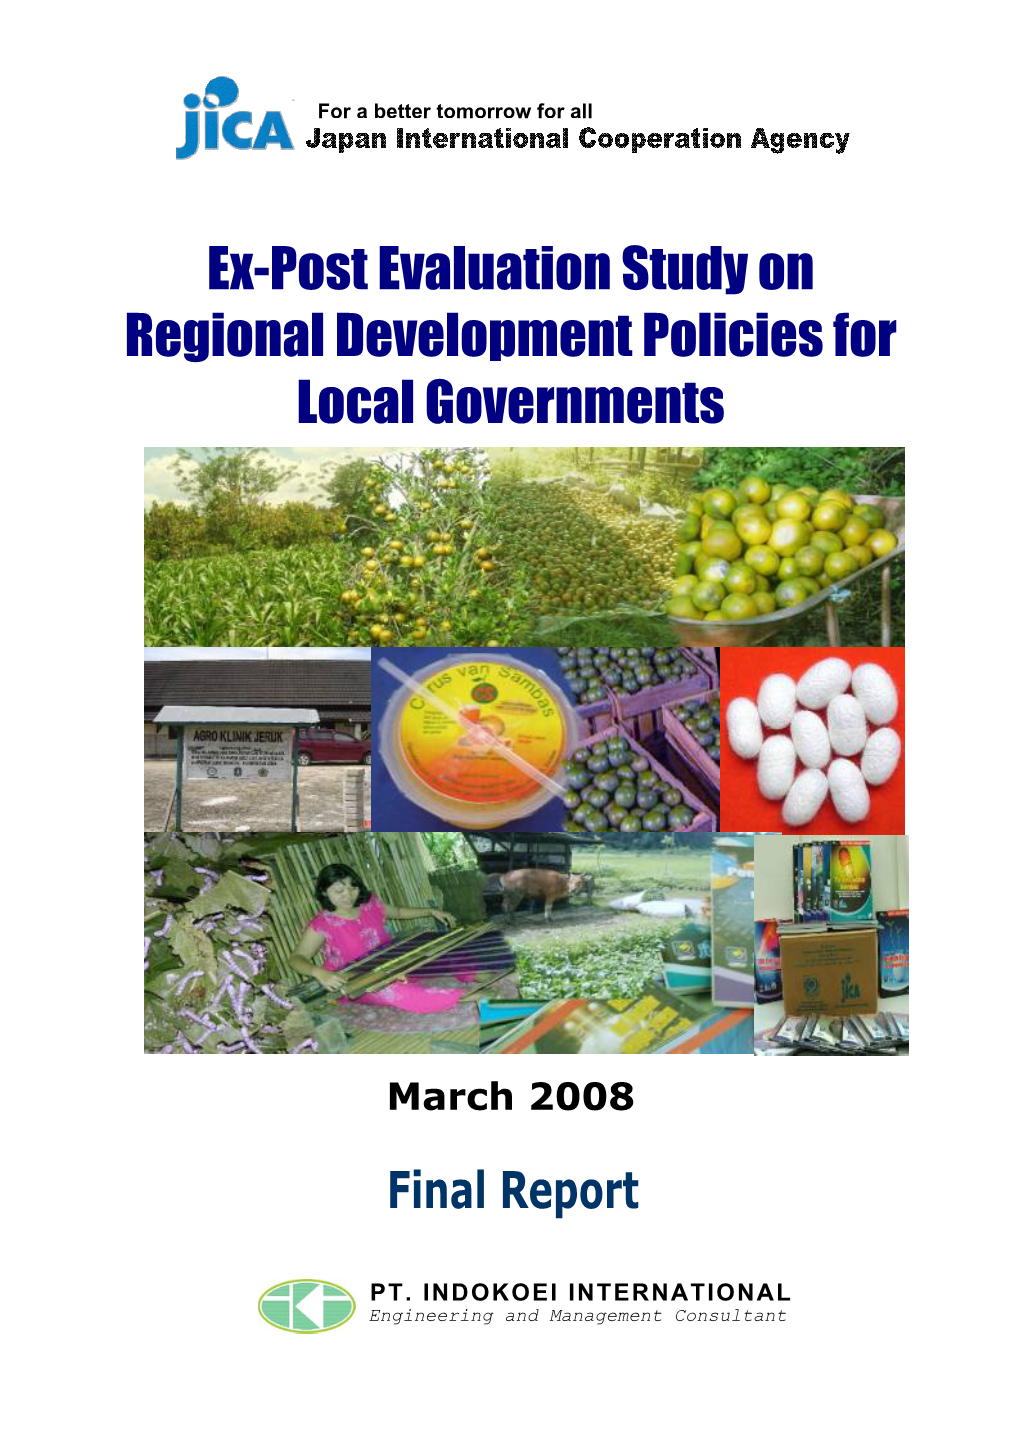 Ex-Post Evaluation Study on Regional Development Policies for Local Governments